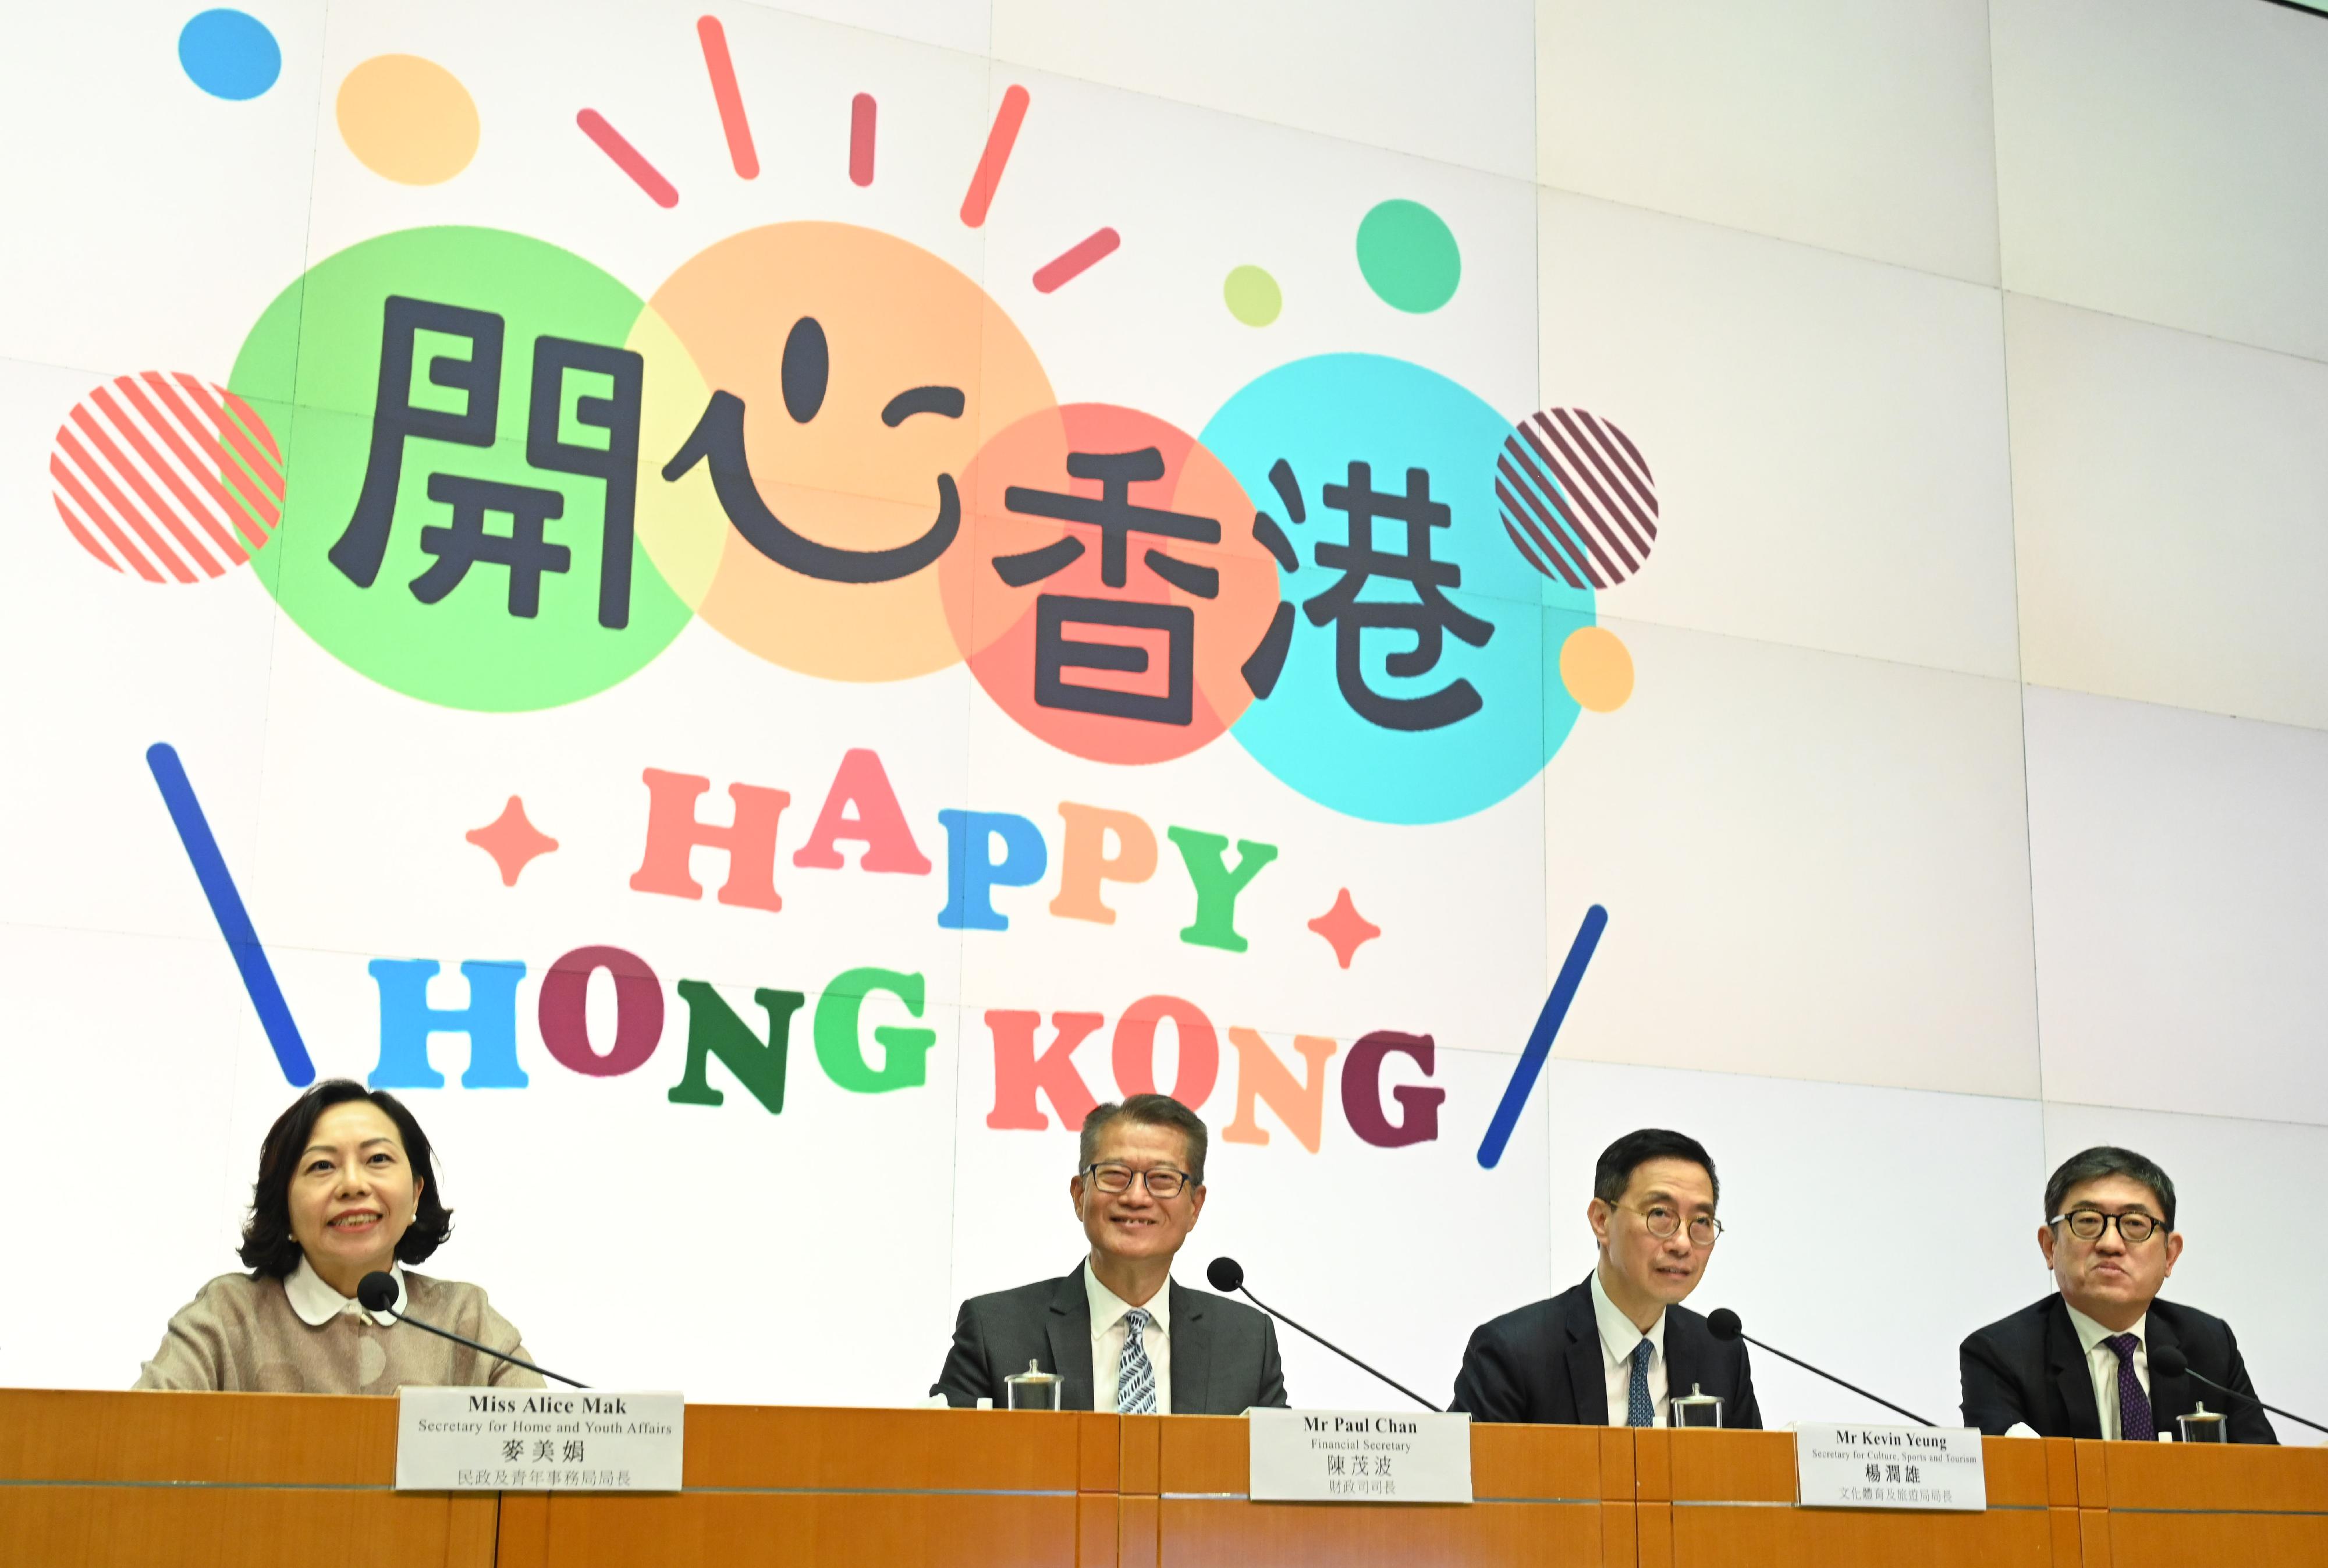 The Financial Secretary, Mr Paul Chan (second left), holds a press conference today (April 24) on the "Happy Hong Kong" Campaign at the Central Government Offices in Tamar. Also in attendance are the Secretary for Culture, Sports and Tourism, Mr Kevin Yeung (second right); the Secretary for Home and Youth Affairs, Miss Alice Mak (first left); and the Executive Director of the Hong Kong Tourism Board, Mr Dane Cheng (first right).